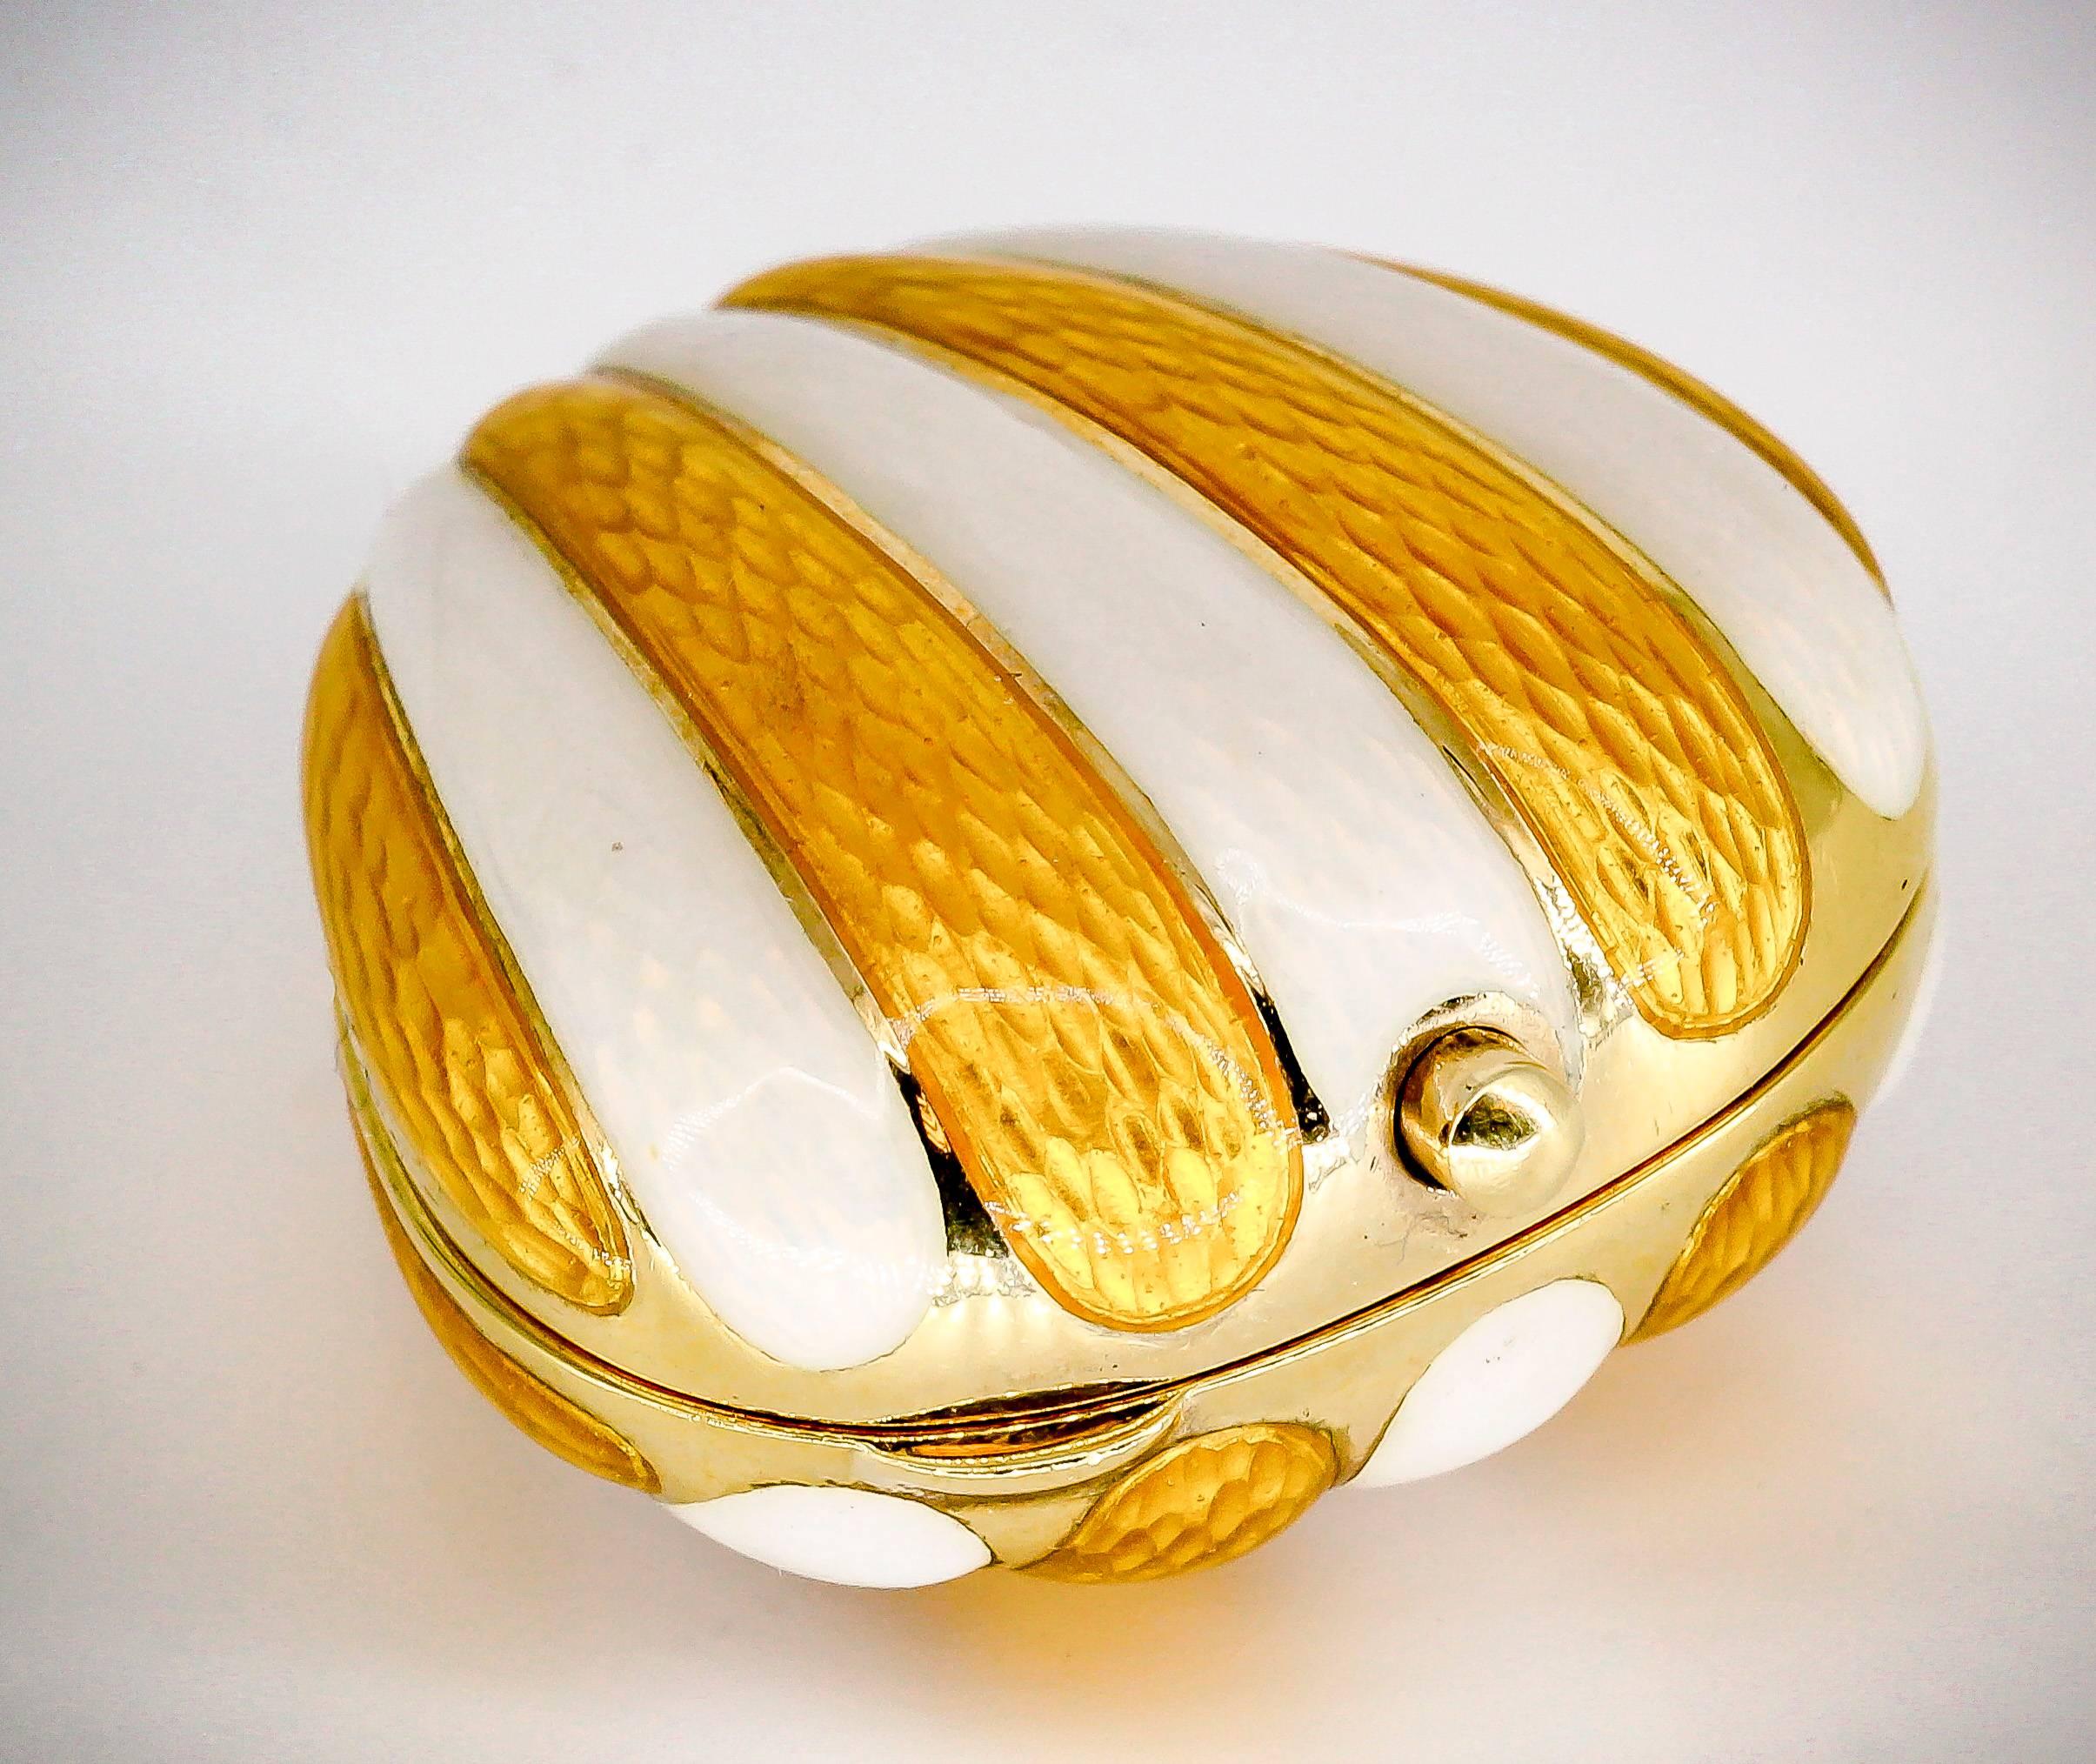 Whimsical white and yellow enamel over 18K yellow gold pill box in the loose likely of a scallop shell. It features a dual colored guilloche enamel ribbed design with beautiful finish, inside is smooth 18K gold. This is a thick pill box with